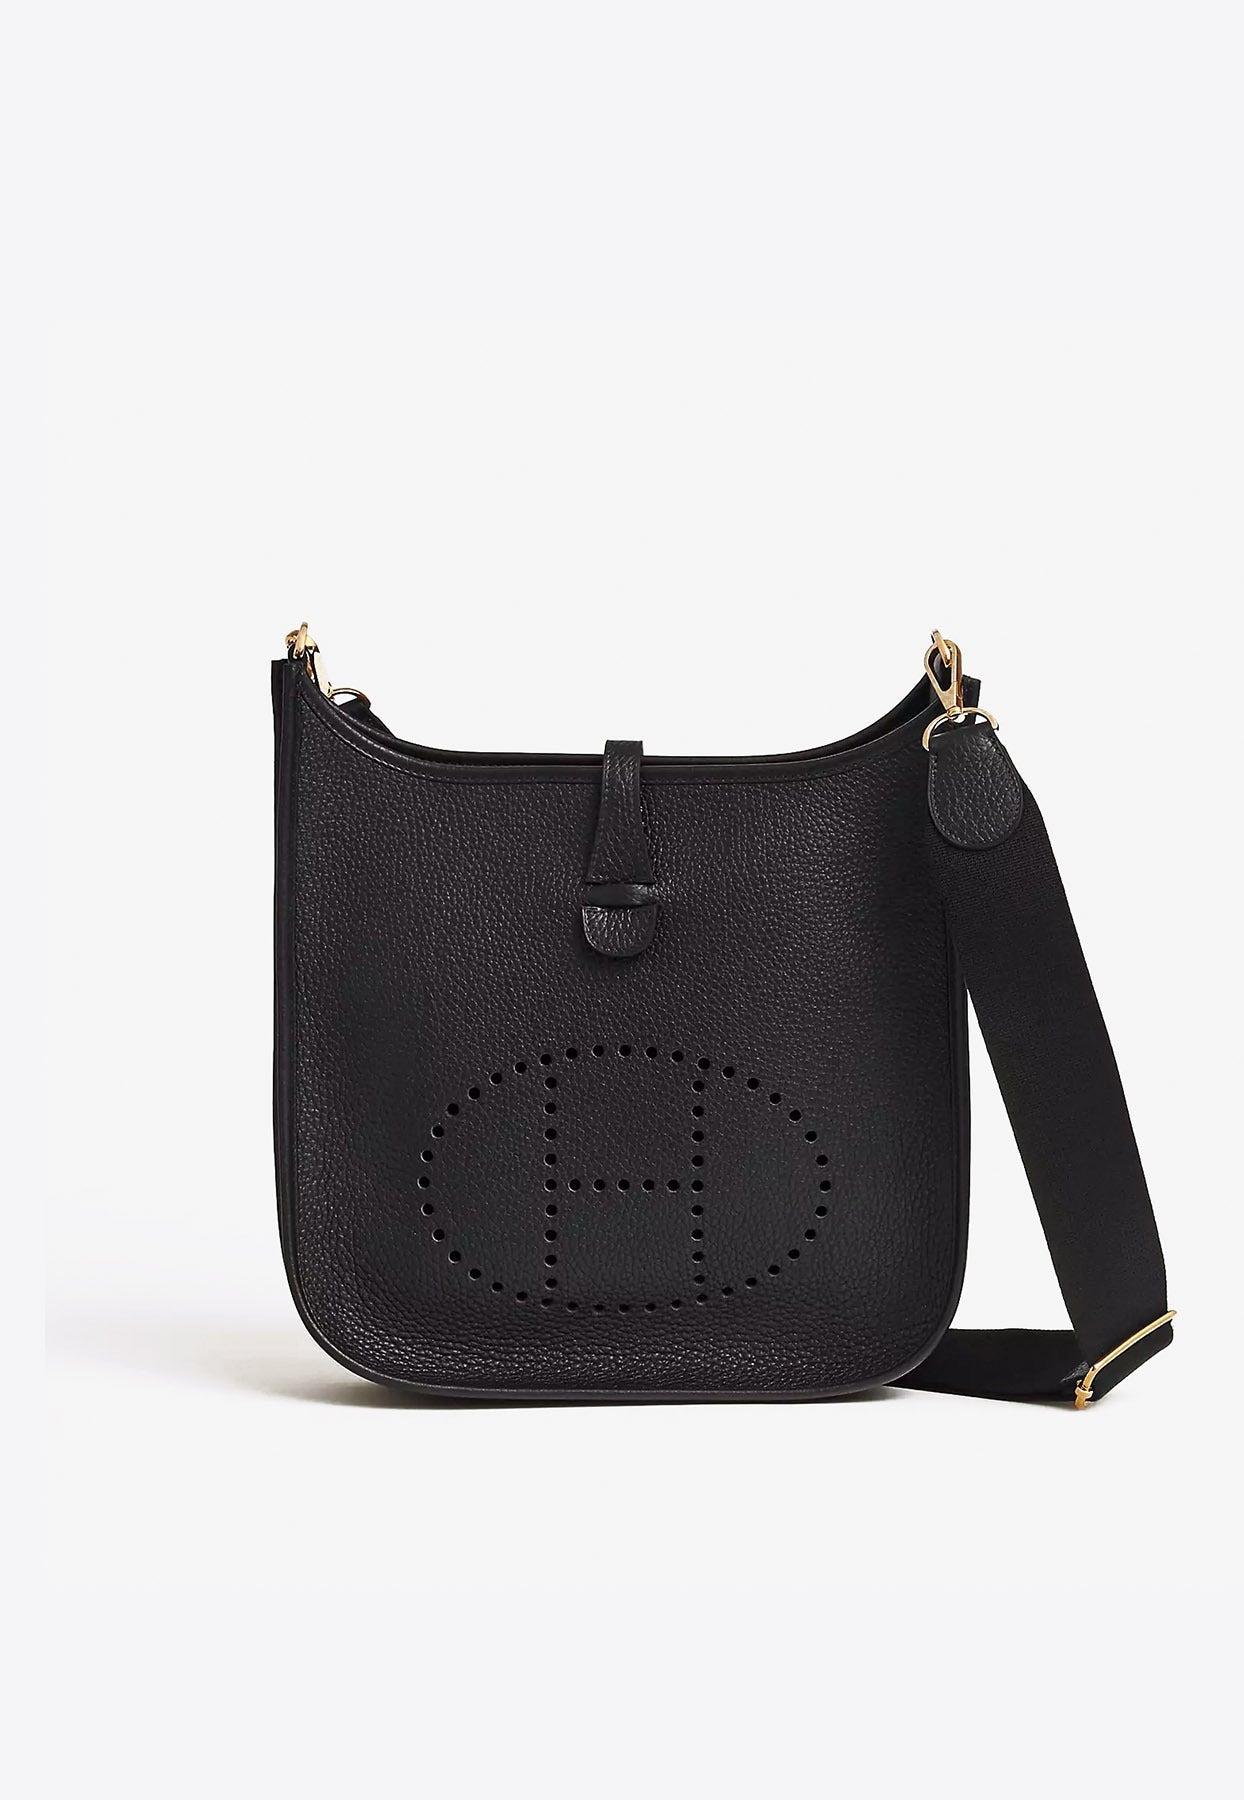 Hermès Evelyne Iii 29 In Black Taurillon Clemence With Gold Hardware | Lyst